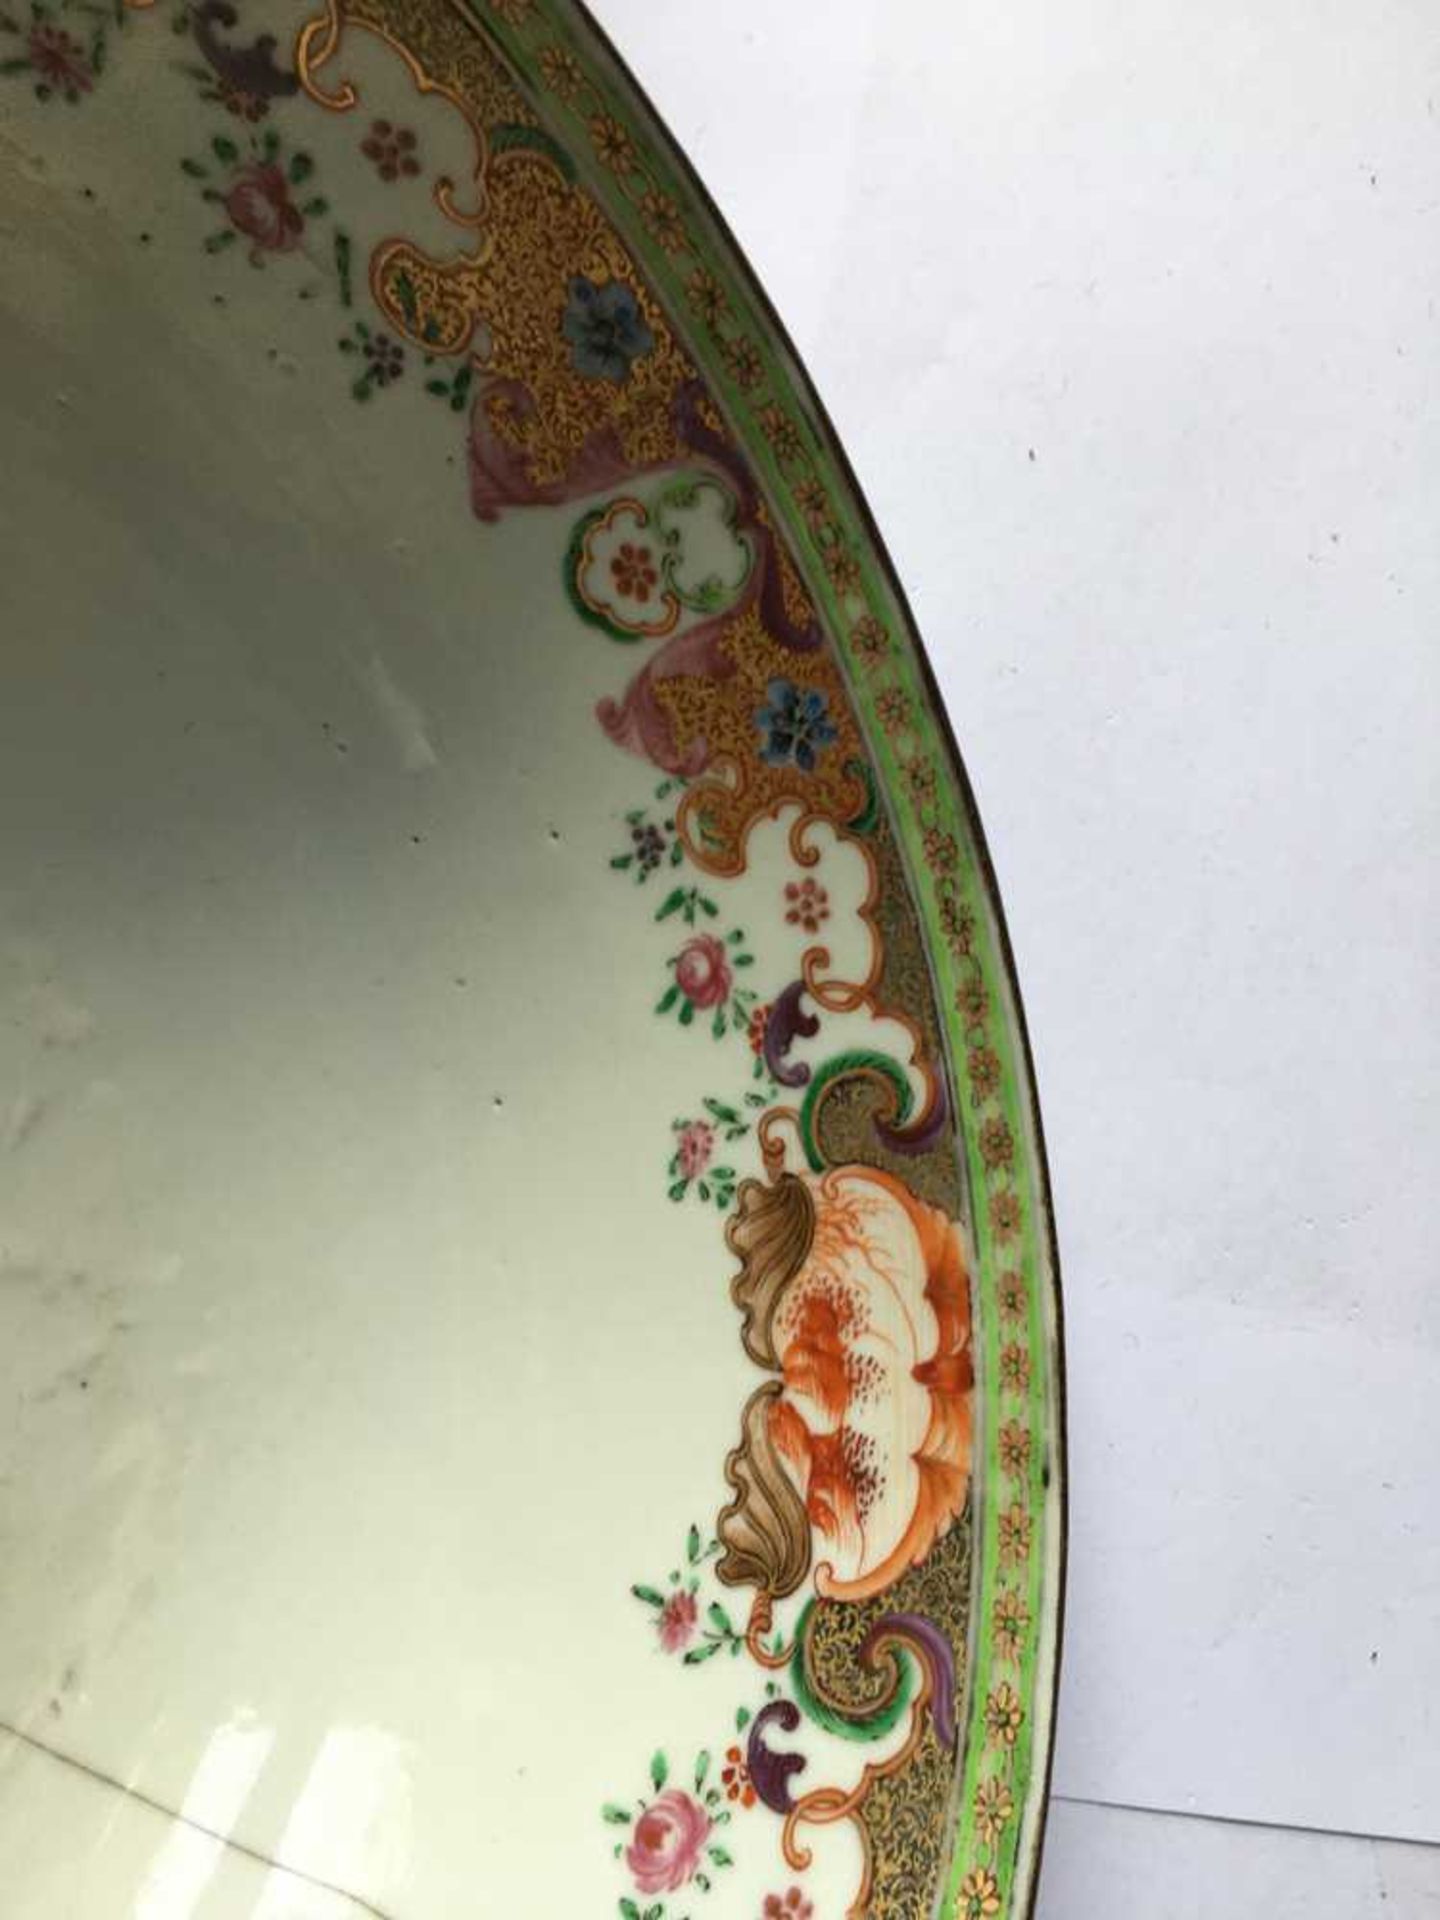 TWO CHINESE EXPORT PORCELAIN PUNCH BOWLS QING DYNASTY, LATE 18TH/19TH CENTURY - Image 23 of 33